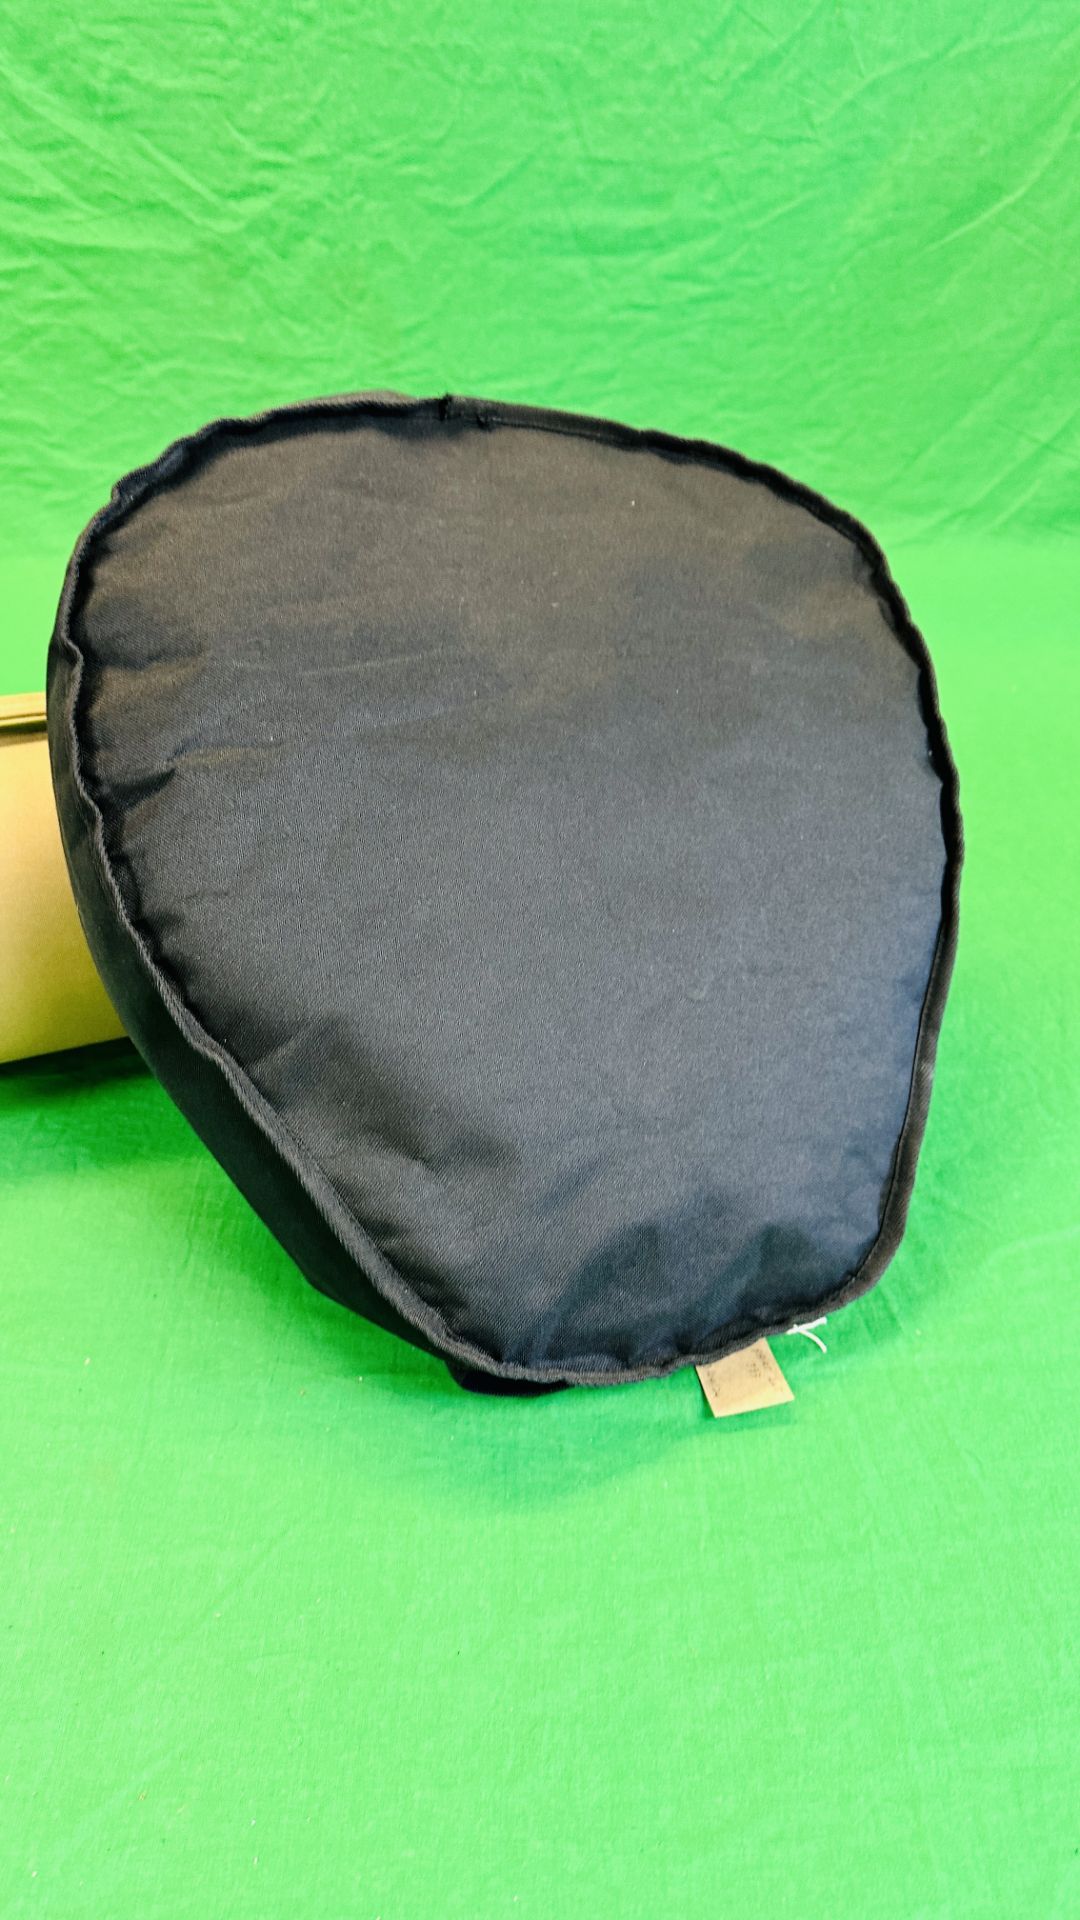 A BLACK CANVAS SHOOTING CUSHION ALONG WITH A GREEN ROLL OUT SHOOTING MAT. - Image 4 of 10